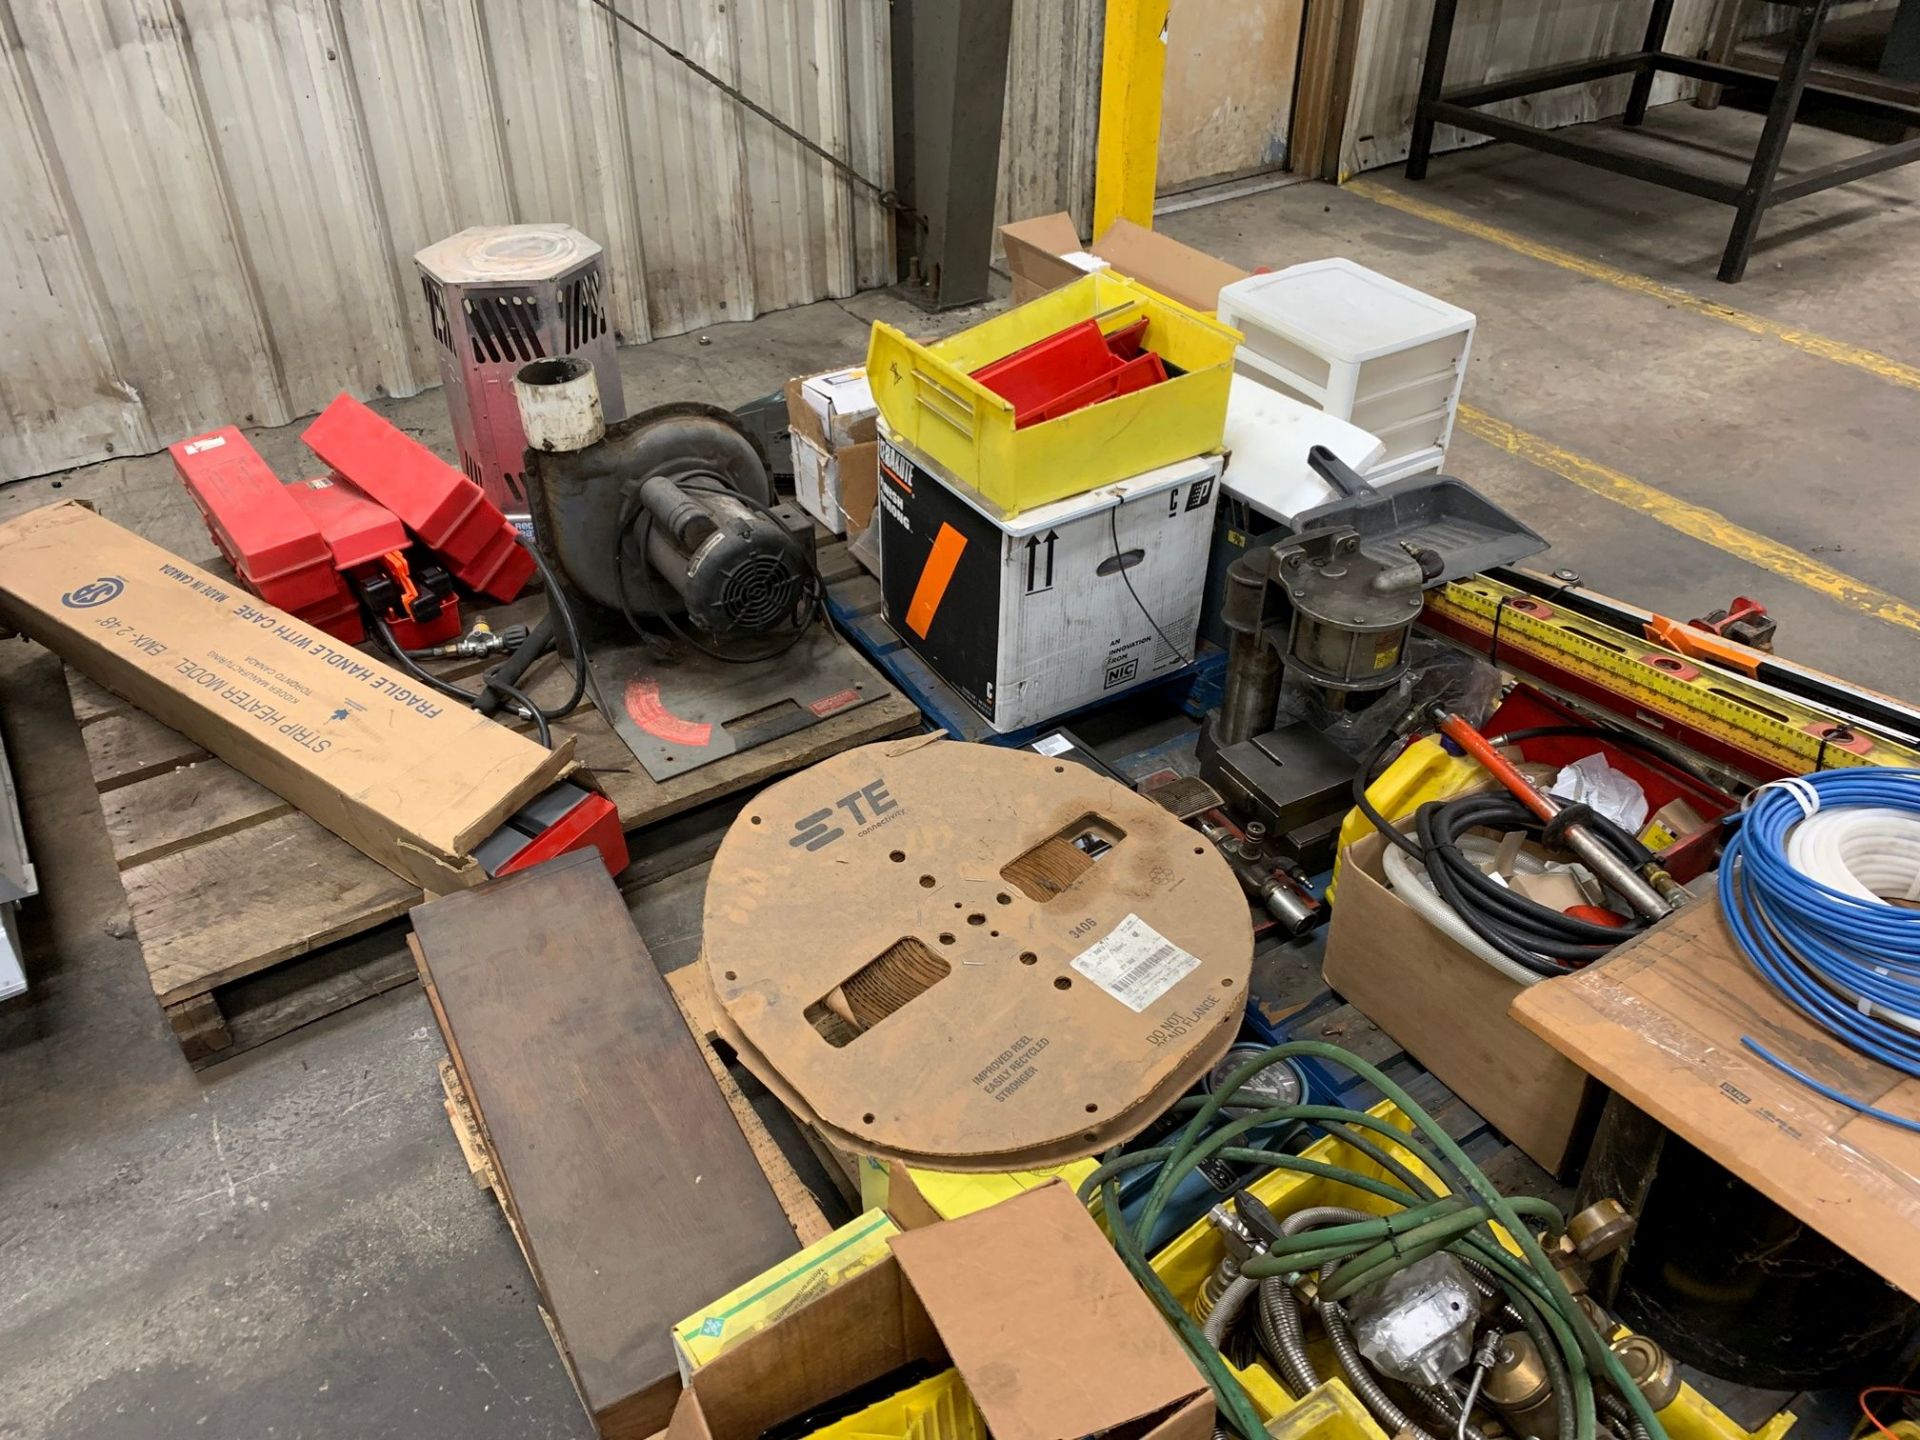 (LOT) MISCELLANEOUS PARTS, TOOLS, HOSE AND BUILDING MAINTENANCE SUPPLIES - Image 3 of 5